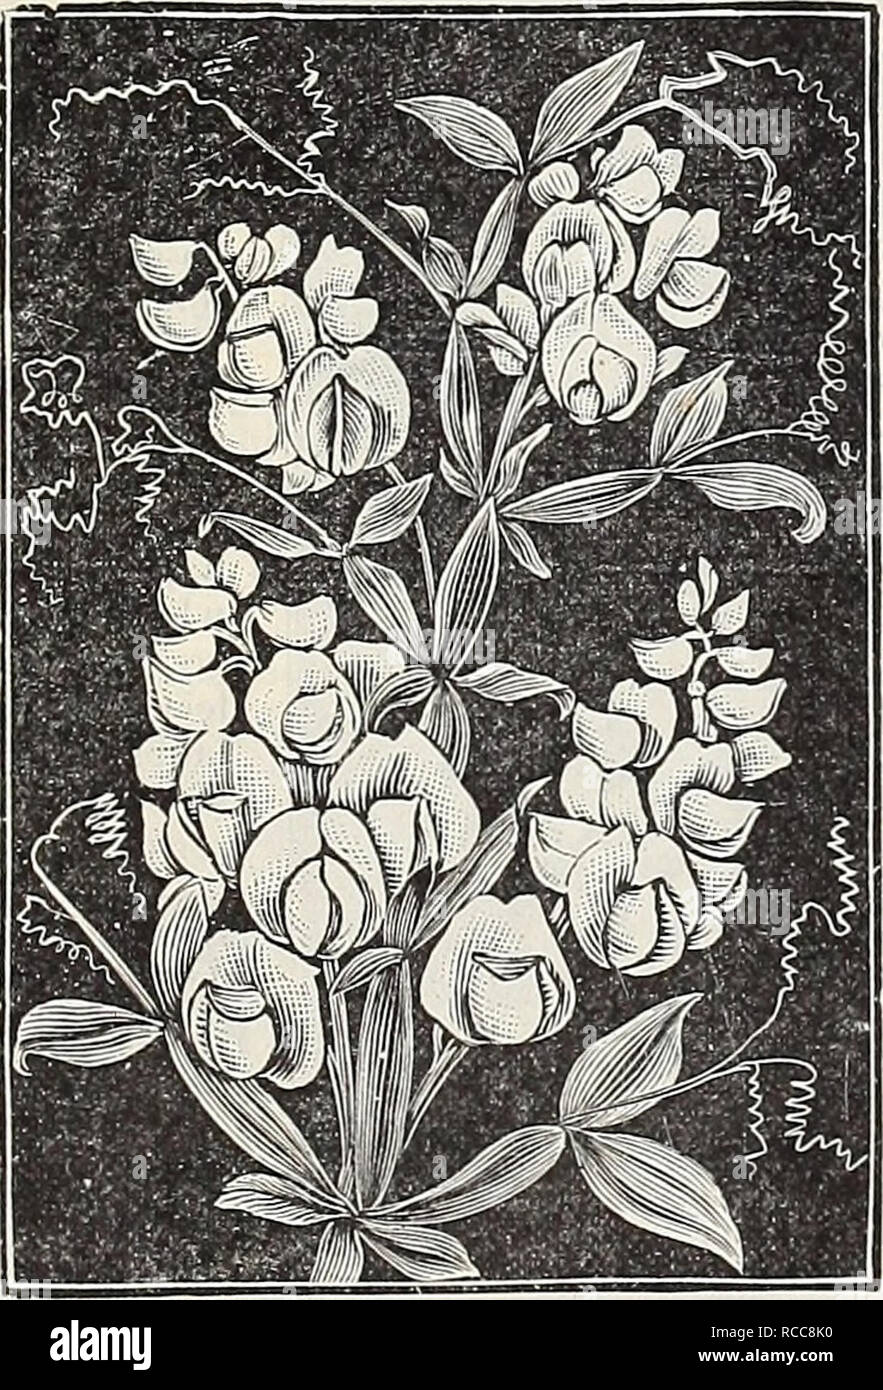 . Dreer's 1907 garden book. Seeds Catalogs; Nursery stock Catalogs; Gardening Equipment and supplies Catalogs; Flowers Seeds Catalogs; Vegetables Seeds Catalogs; Fruit Seeds Catalogs. New and Rare Hardy Climbing; Plants. g==^^ - Â»&gt;MI Mââ- ^1 til F*S SAfgJpjZjTbMgi &amp;p* &quot;Hfi*3Br '^5^SmTi'^r^L&quot; ''^raa mK^kb M JH E^^WSiPr P^?&amp;&quot;: v*-*' â ^^psi^^i^i ^fe^lH^iftS^^Bi Clematis Montana Grandiflora. New Hardy Yellow Jasmine. JASMINUM PRIMULIUM. The old time favorite Jas- minutn Nudiflorum is espe- cially admired on account of its early fiowering,its flowers, in a sheltered pos Stock Photo